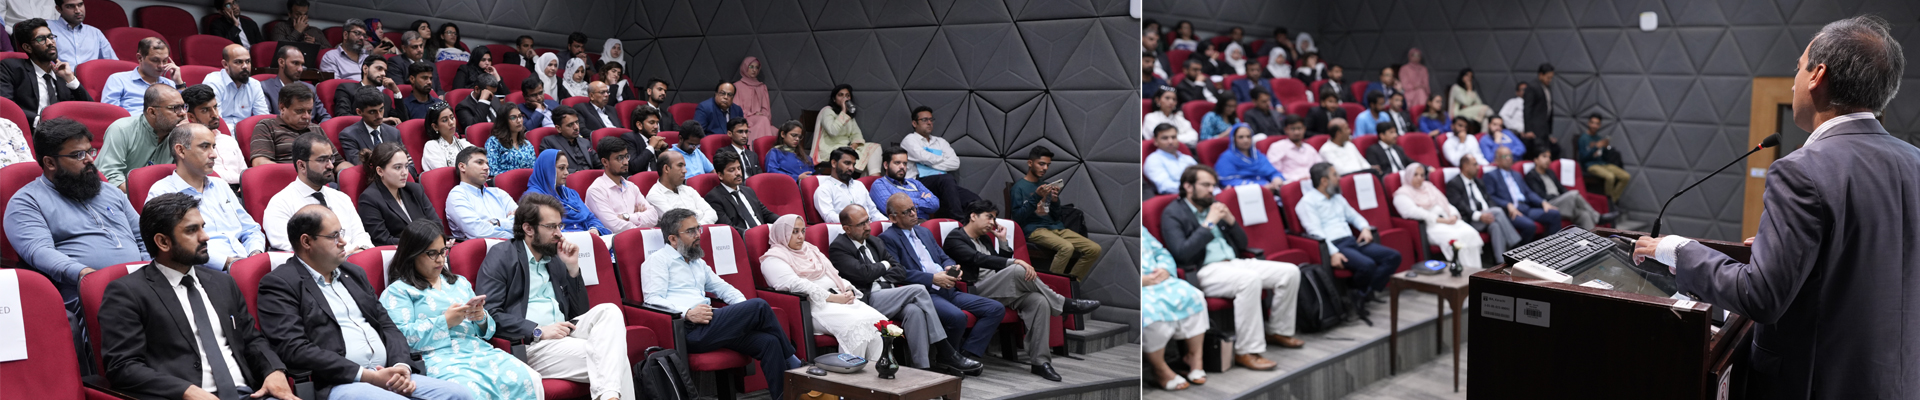 CEE at IBA Karachi conducts a seminar on domestic & international trends in dispute resolution of commercial contracts in collaboration with CIArb Pakistan